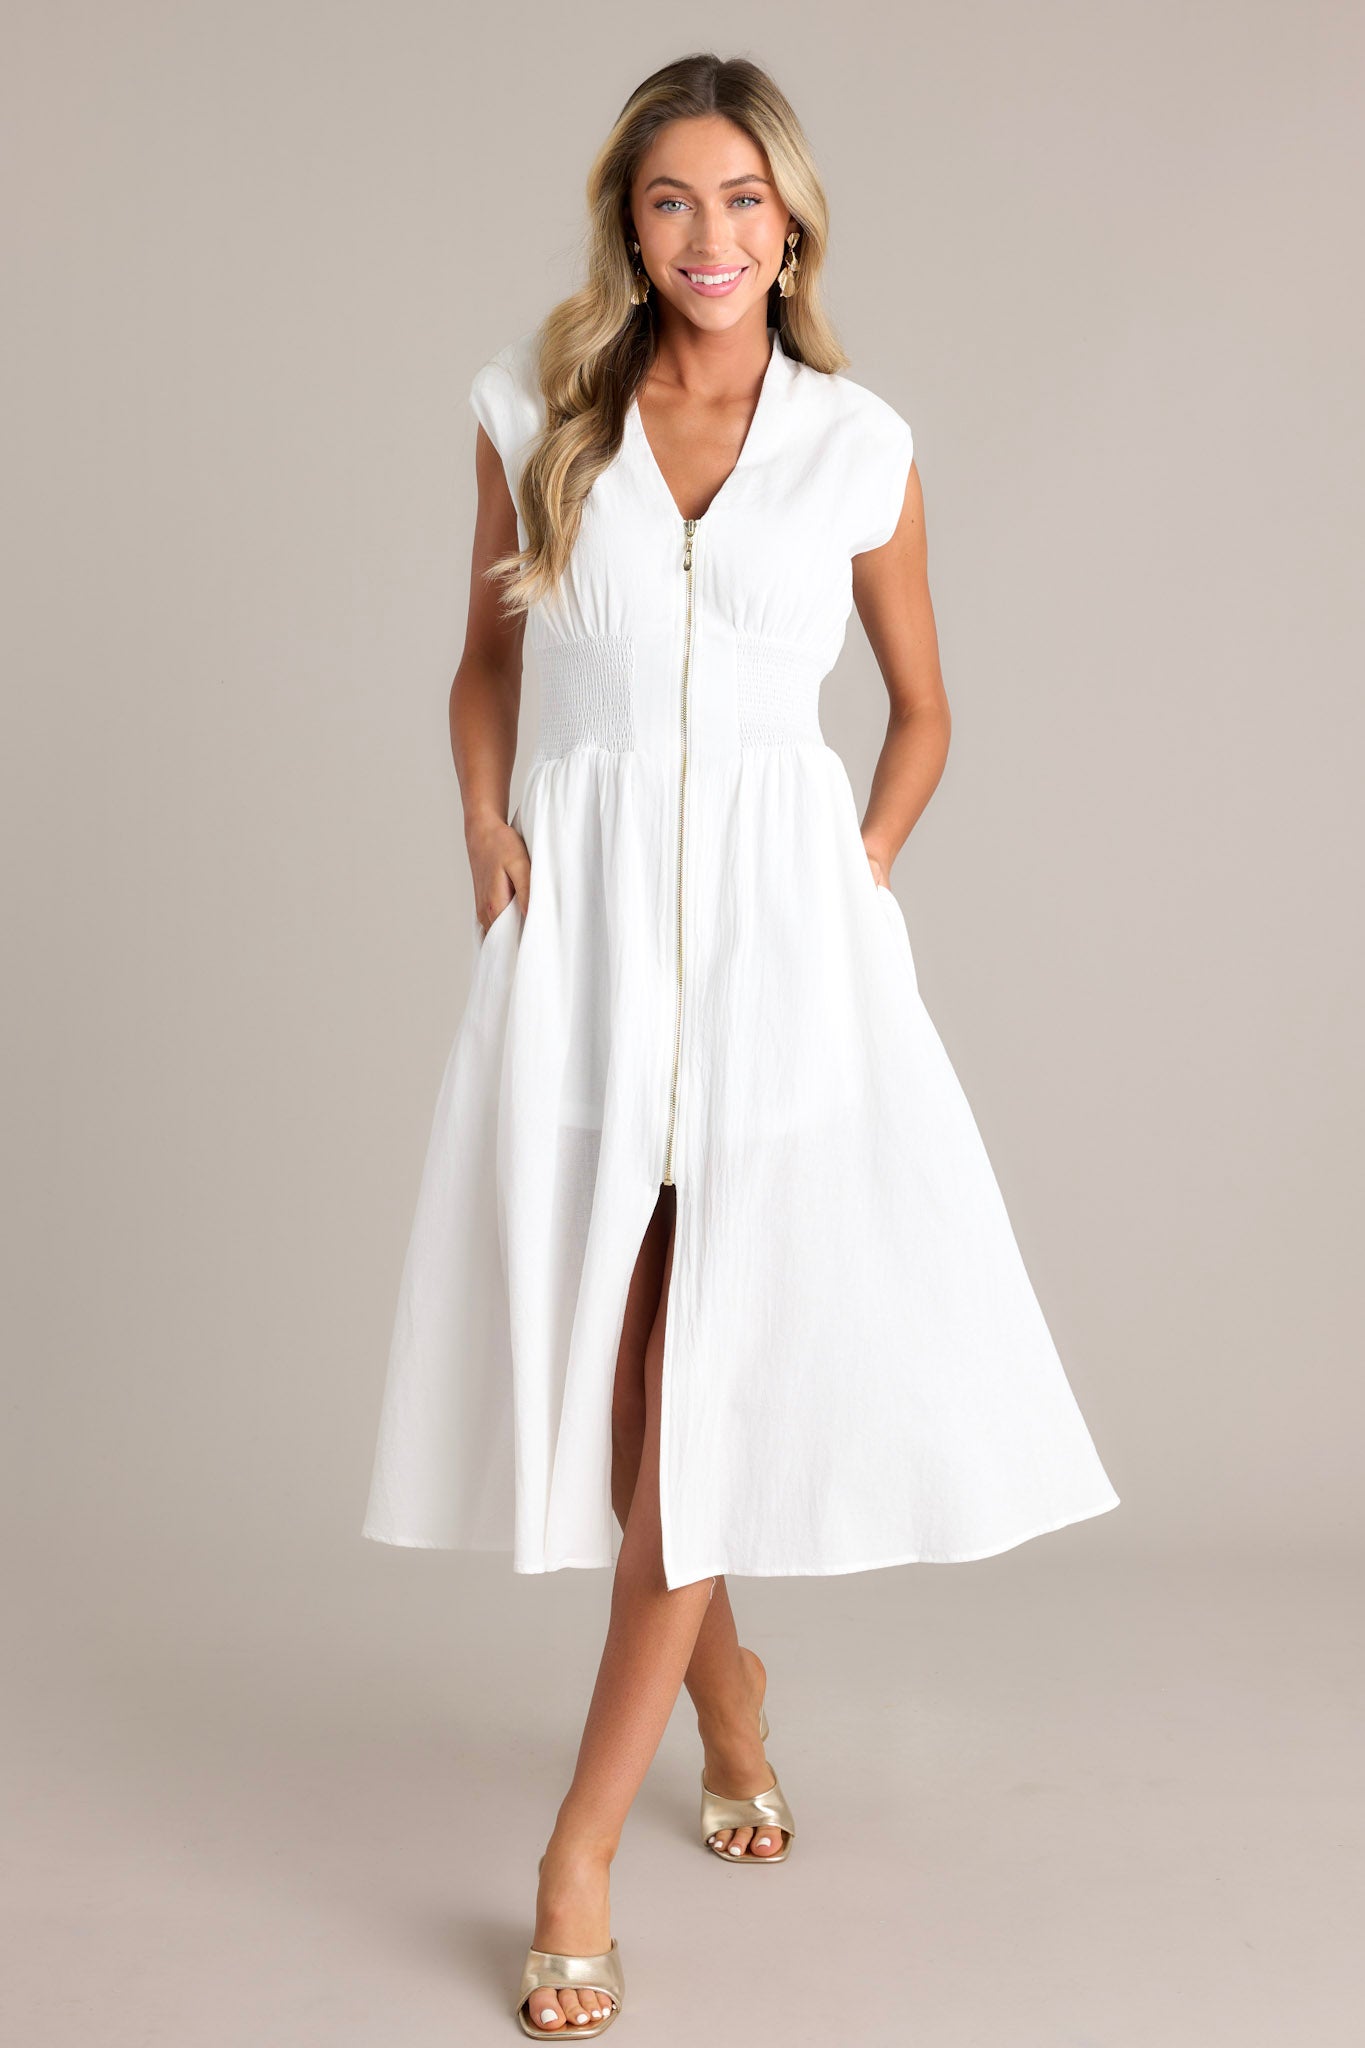 Full length view of a white midi dress featuring a deep v-neckline, shoulder padding, a functional zipper front, a fully smocked waist, functional pockets, and a front slit